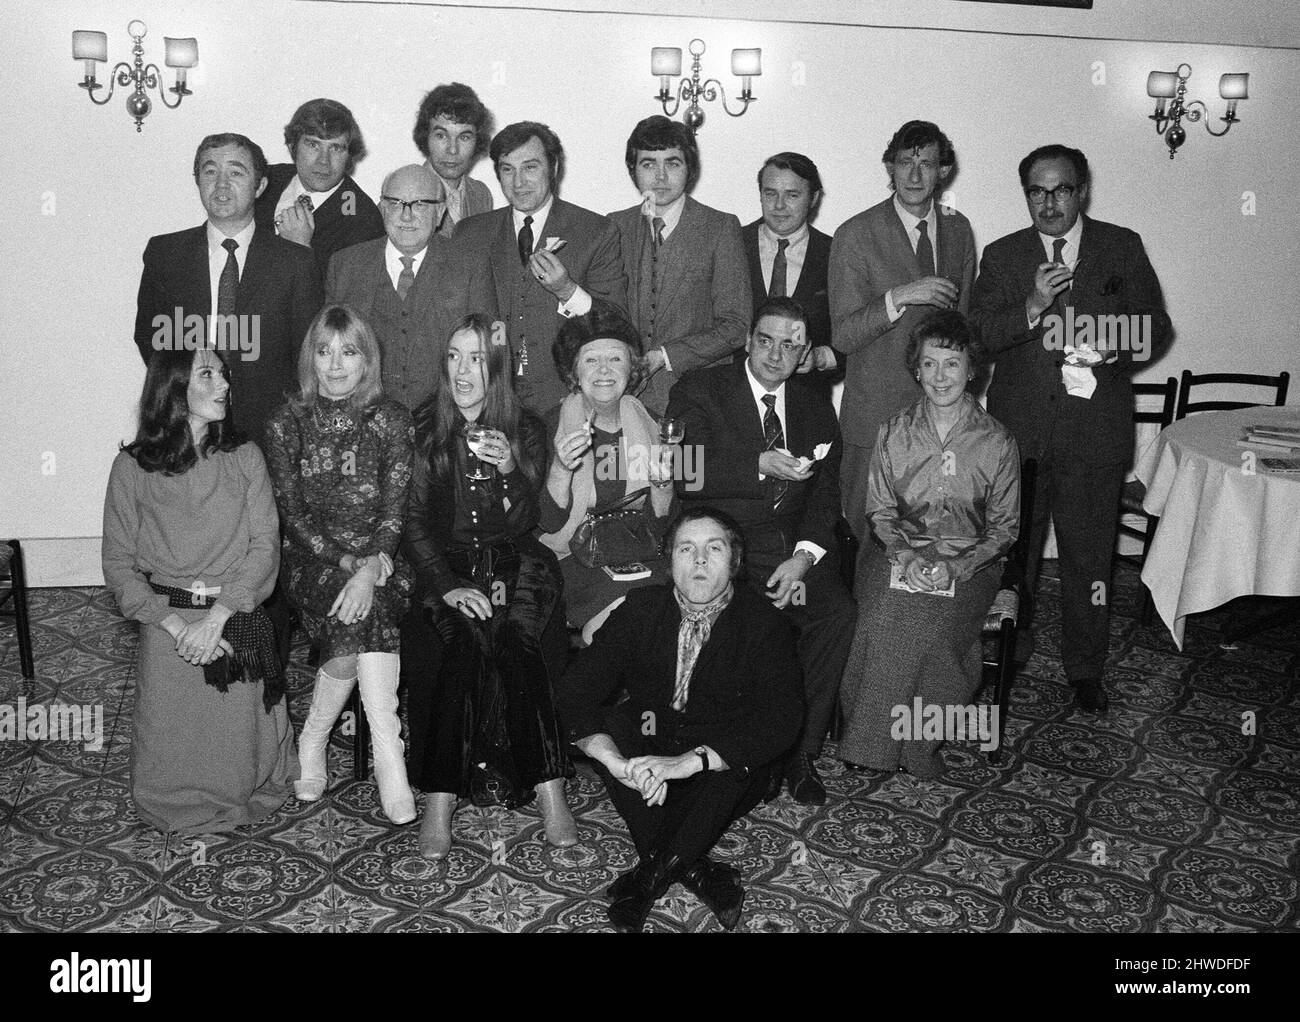 Some past faces from Coronation Street have got together at the Terretse-Est Restaurant on Chancery Lane to celebrate the 10th Anniversary of the show. L-R Graham Haberfield, Arthur Lowe, Brian Rawlinson, Ernst Waldner, Nigel Humphreys. Bill Kenwright, Jack Smethurst, Gordon Rollings, Reg Marsh, (bottom) Susan Jameson, Renny Lister, Christine Hargreaves, Doris Hare, Frank Pemberton, Noel Dyson and Kenneth Cope (front). 8th December 1970. Stock Photo